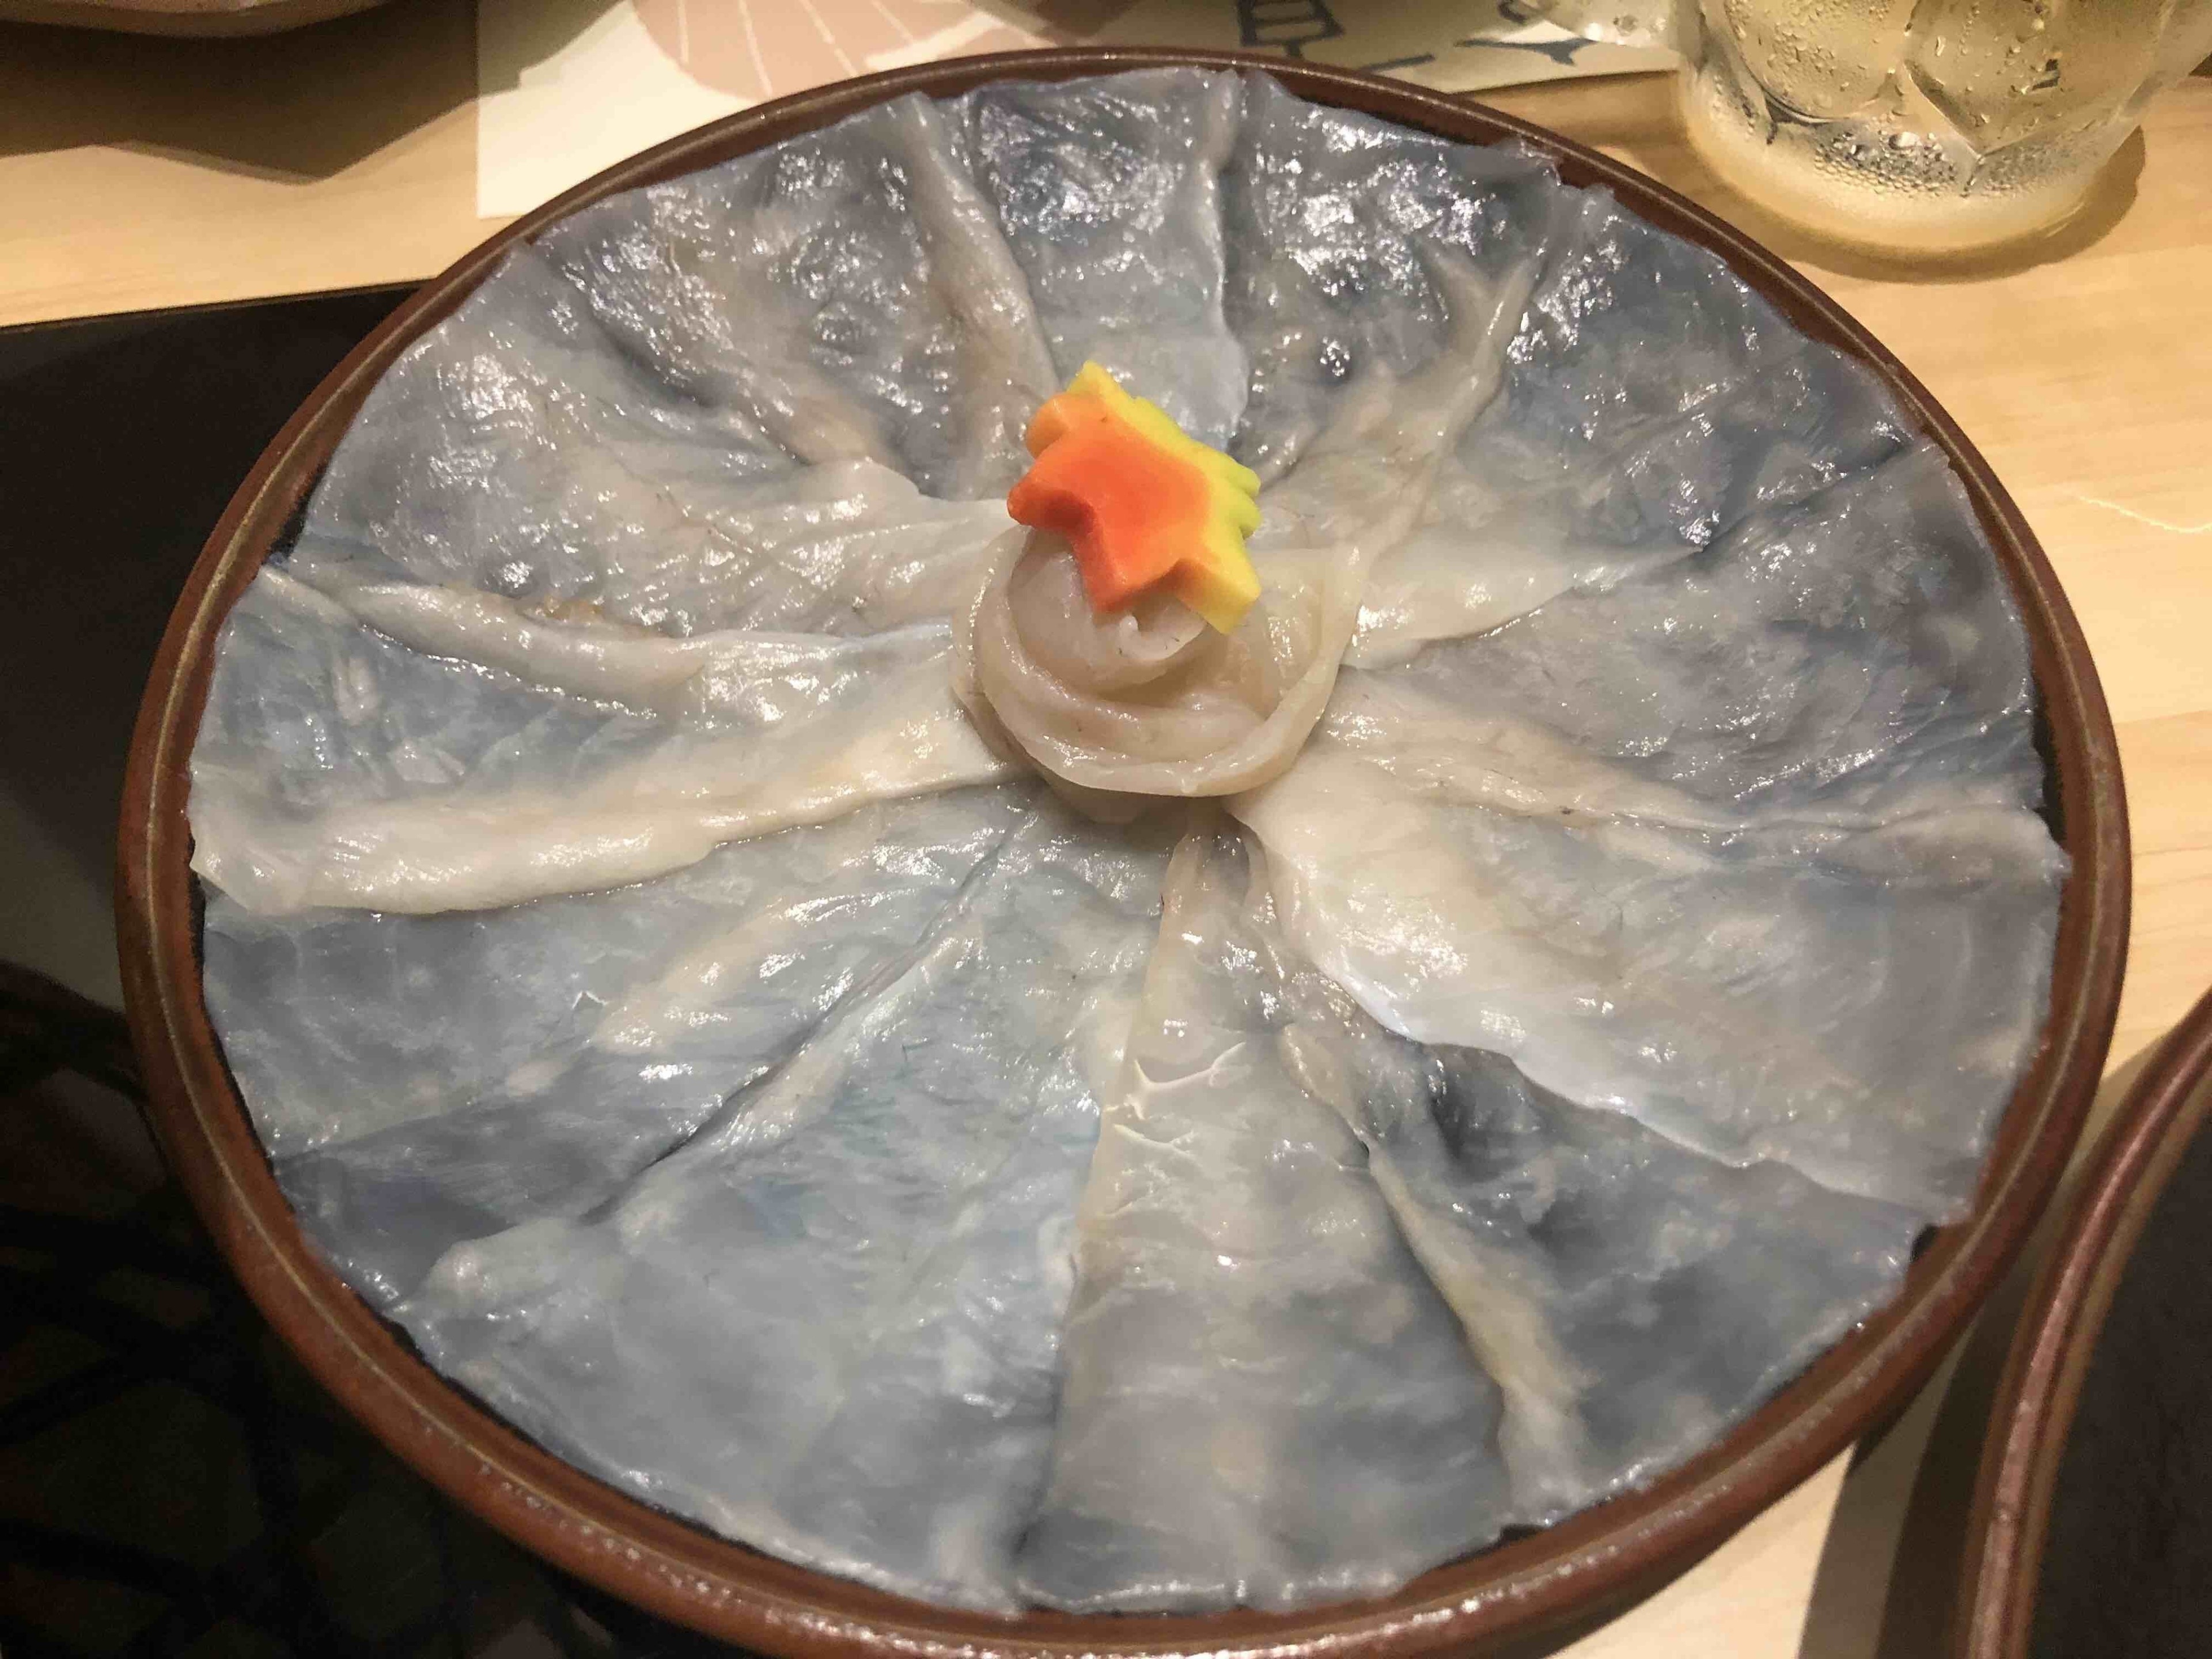 This is puffer fish sashimi from Guenpin Fugu & Snow Crab Japanese Restaurant. First time trying it since you rarely had the chance to eat puffer fish in Singapore. Nice environment and quite yummy food!